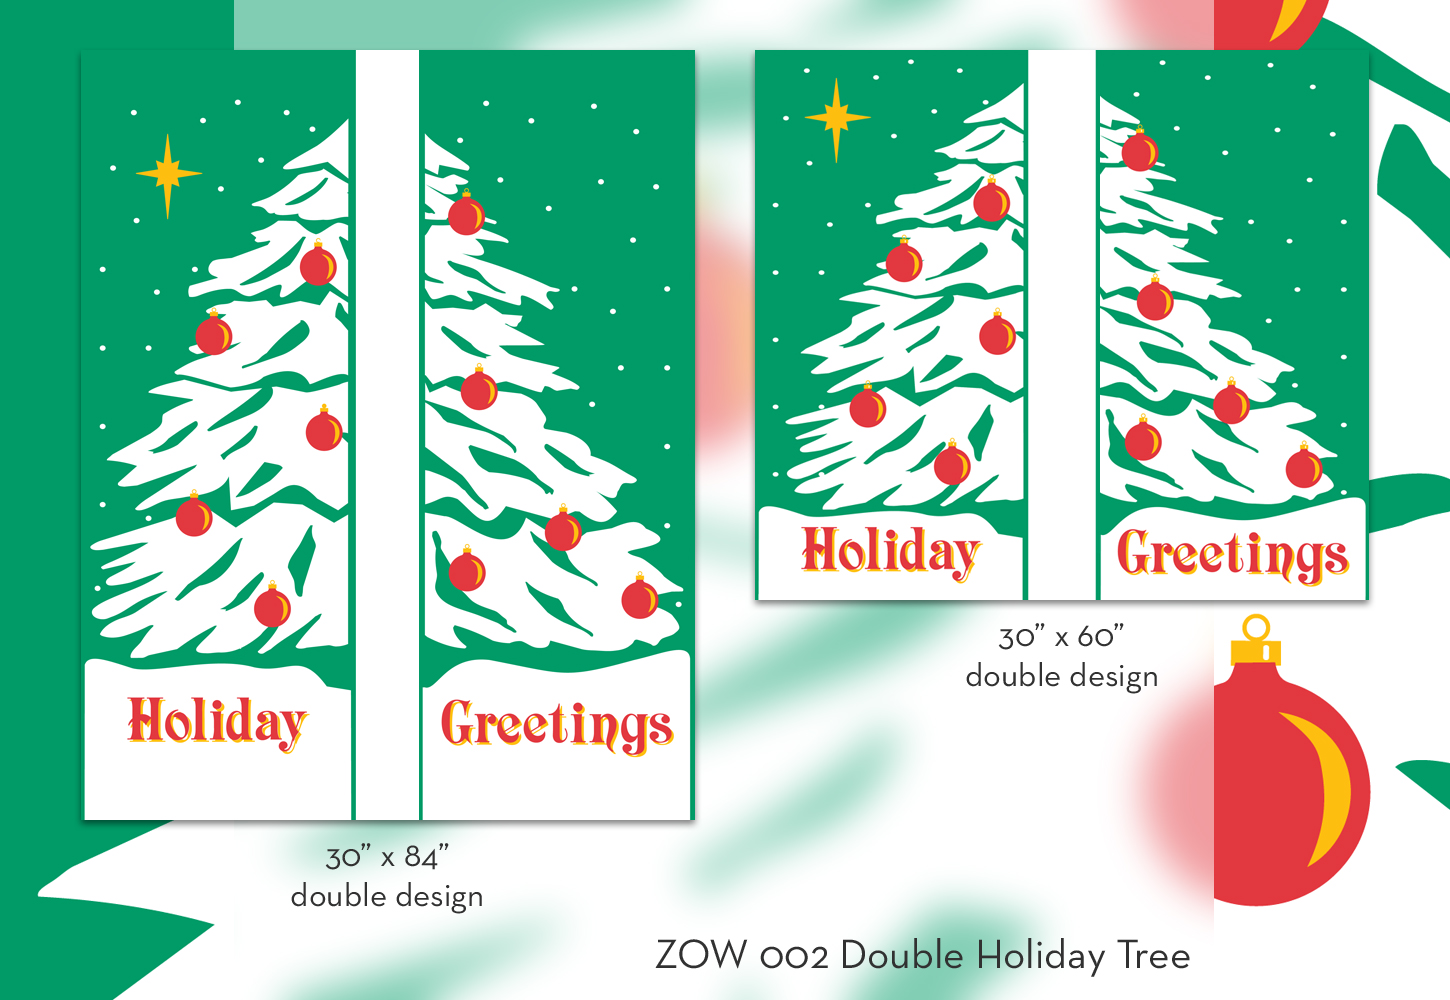 ZOW 002 Double Holiday Tree